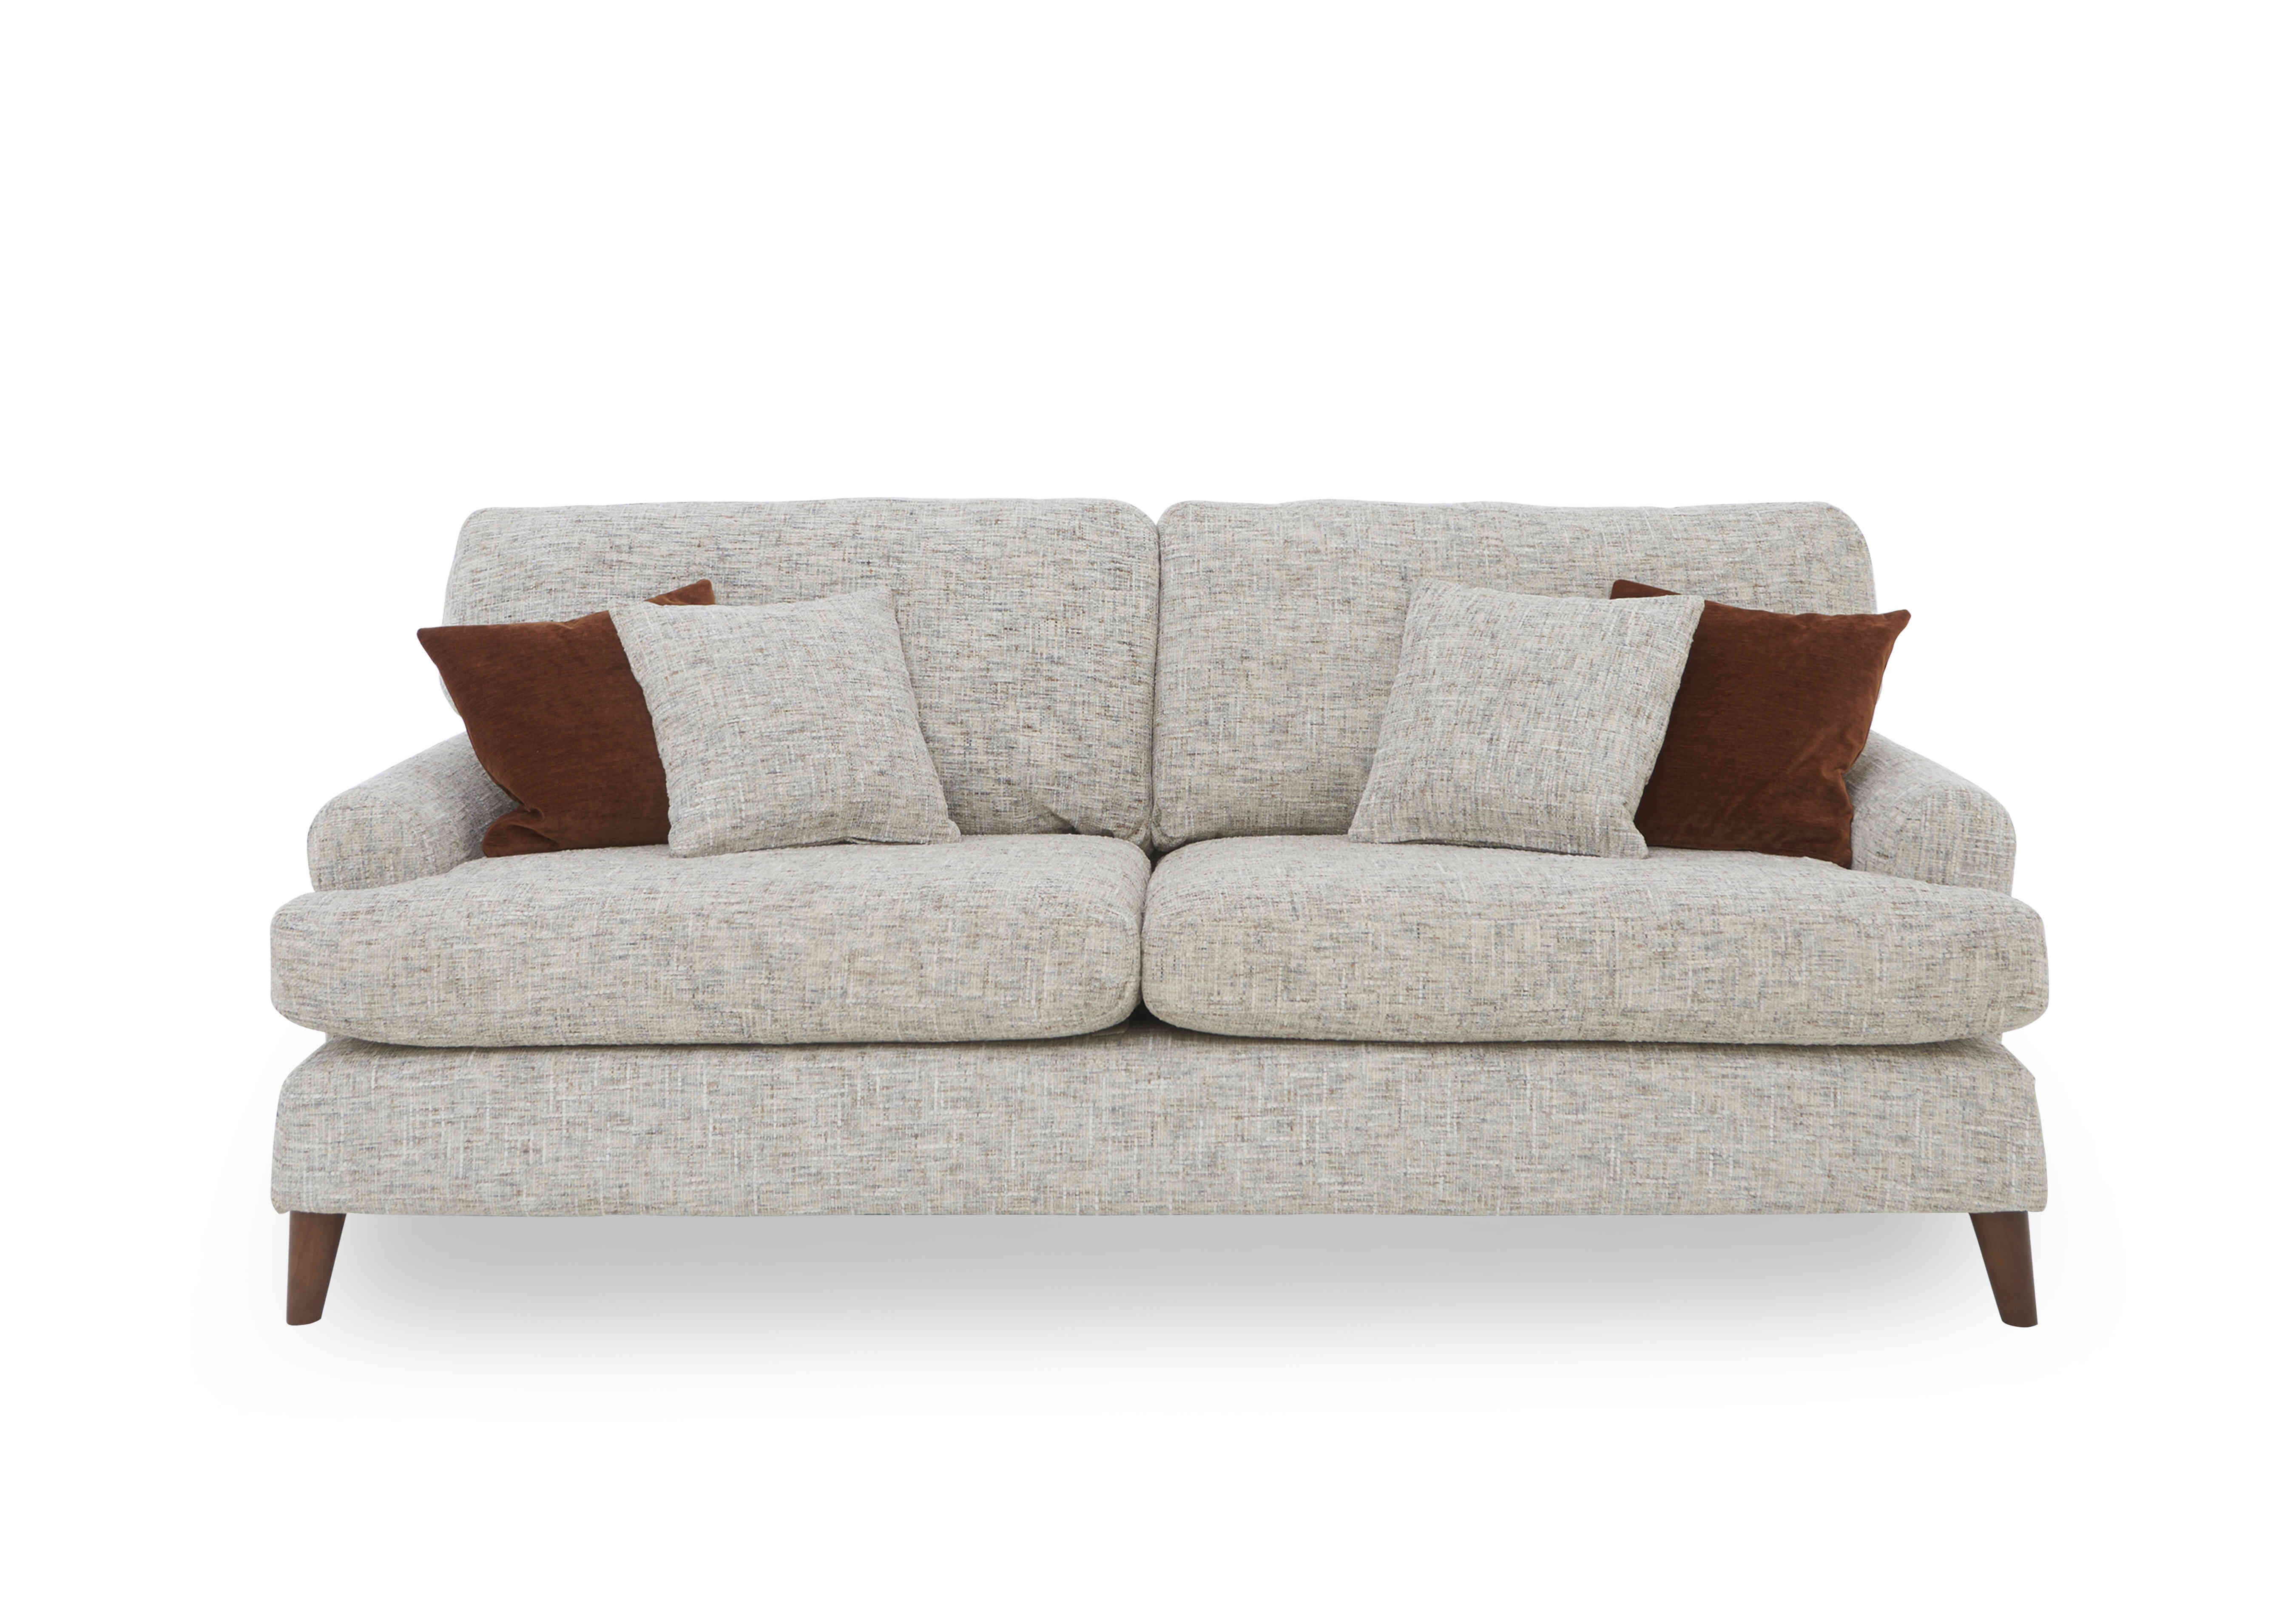 Jackson 4 Seater Fabric Sofa in Frost on Furniture Village